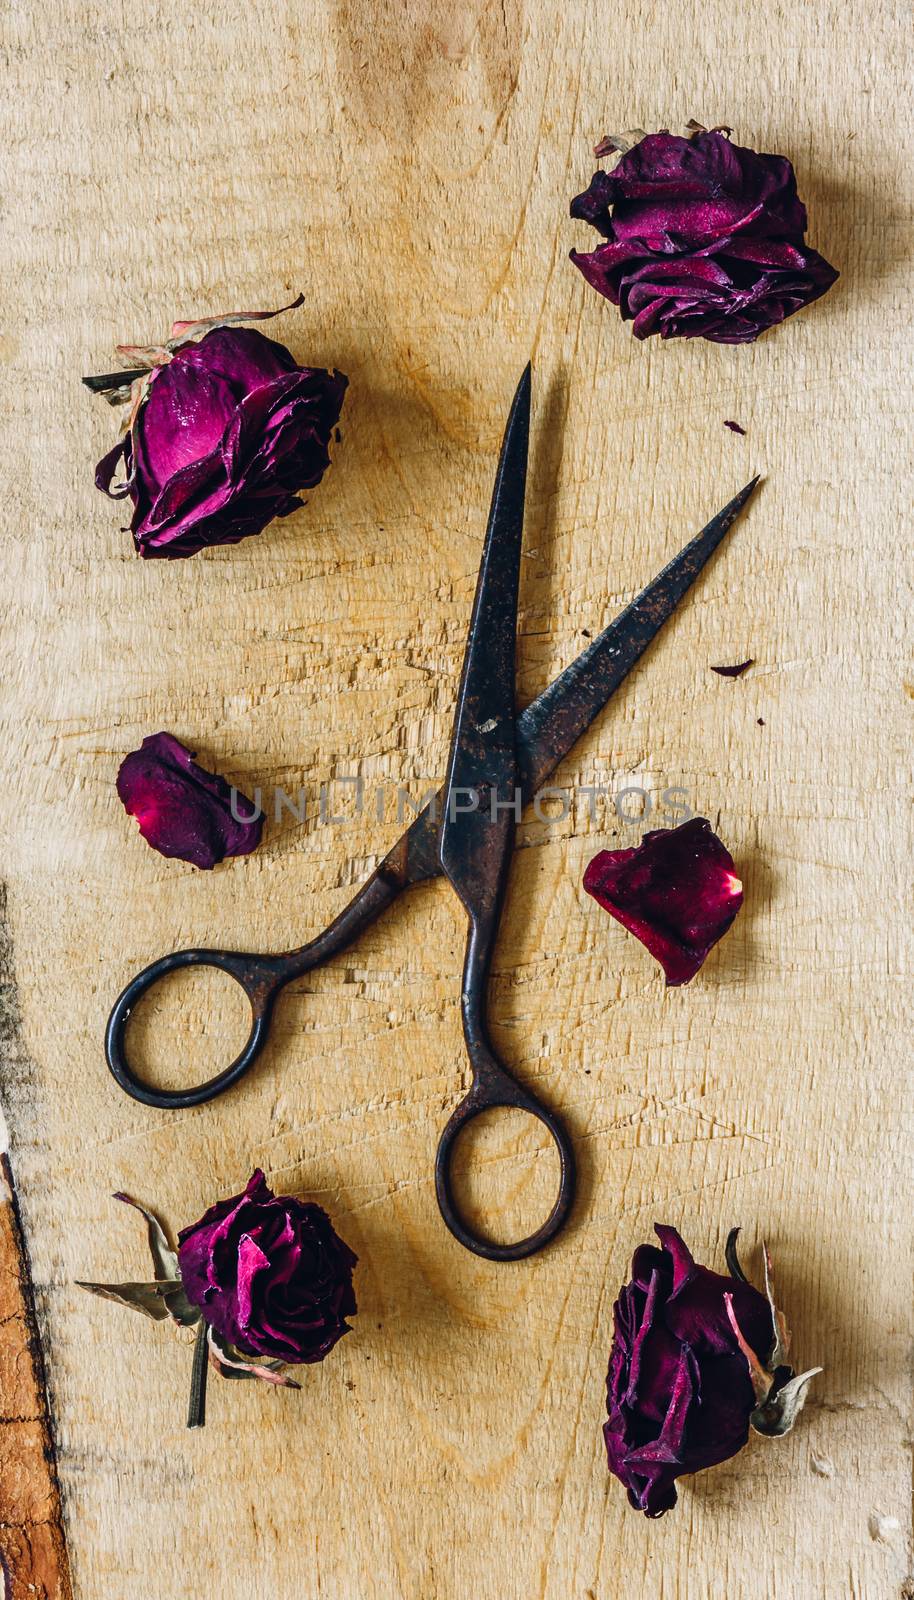 Old Scissors with Dry Roses Buds. View from Above.